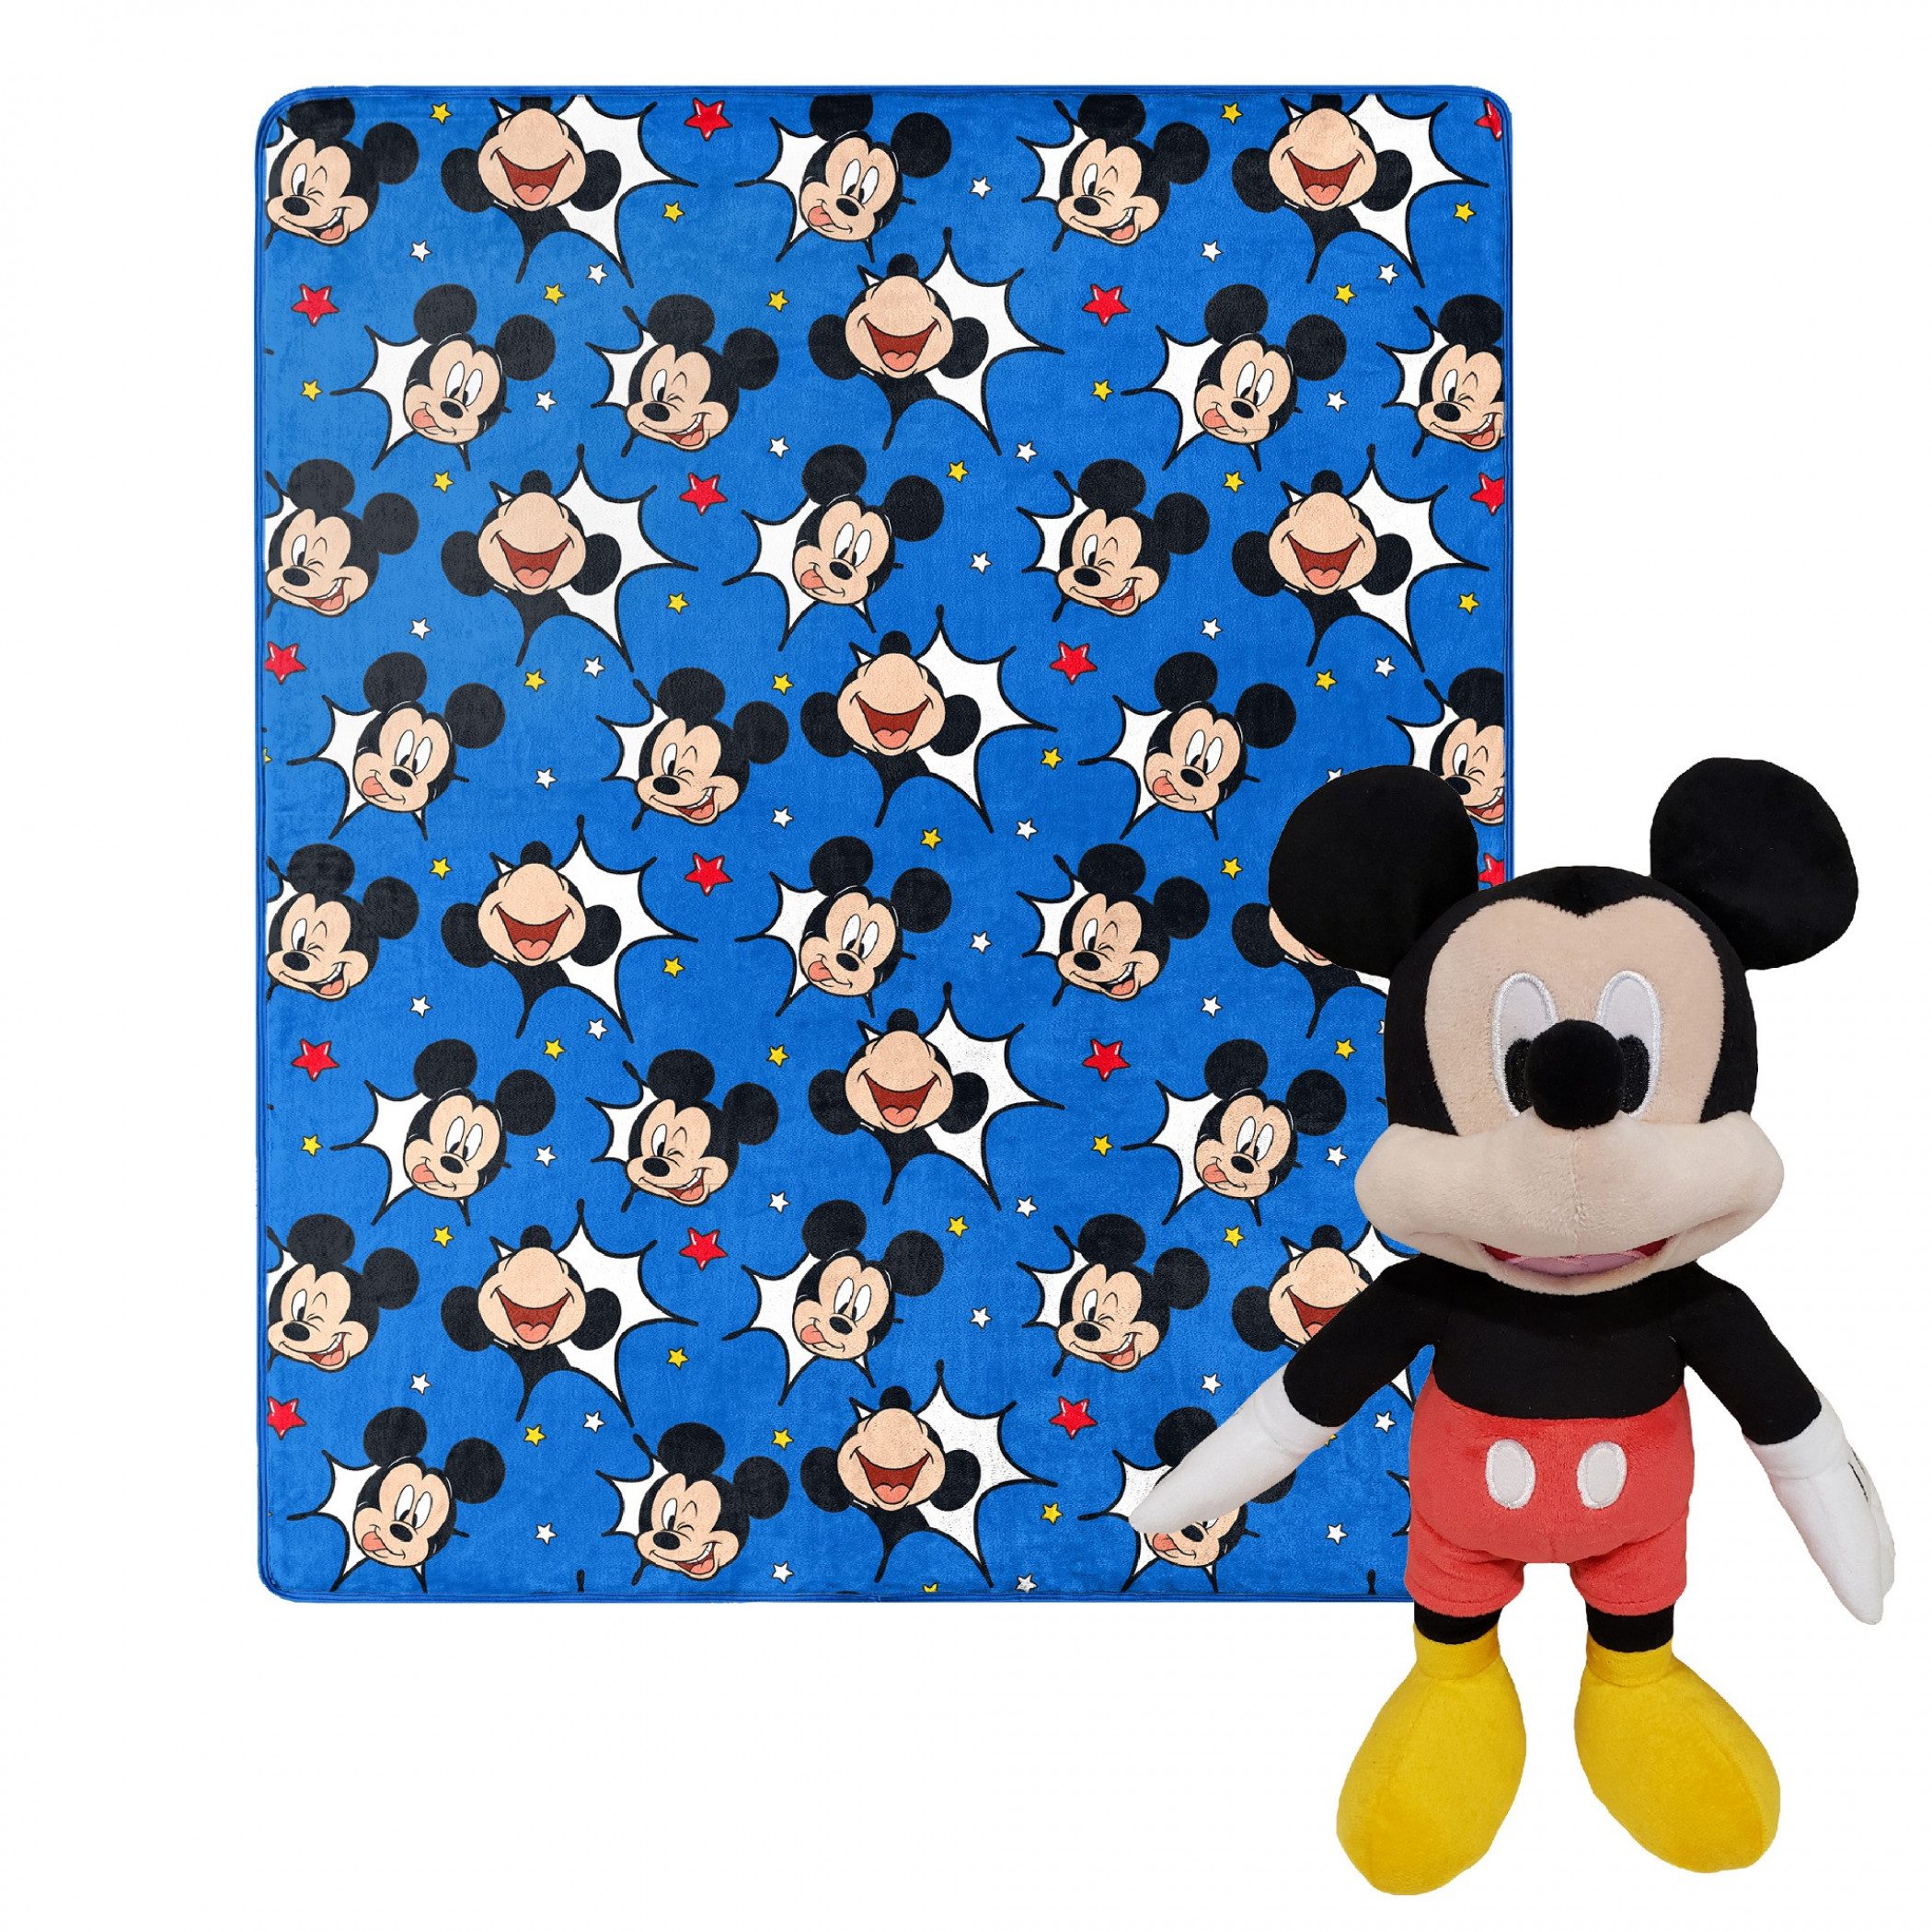 Disney Mickey Mouse Faces 40 X 50 Silk Touch with Plush Hugger